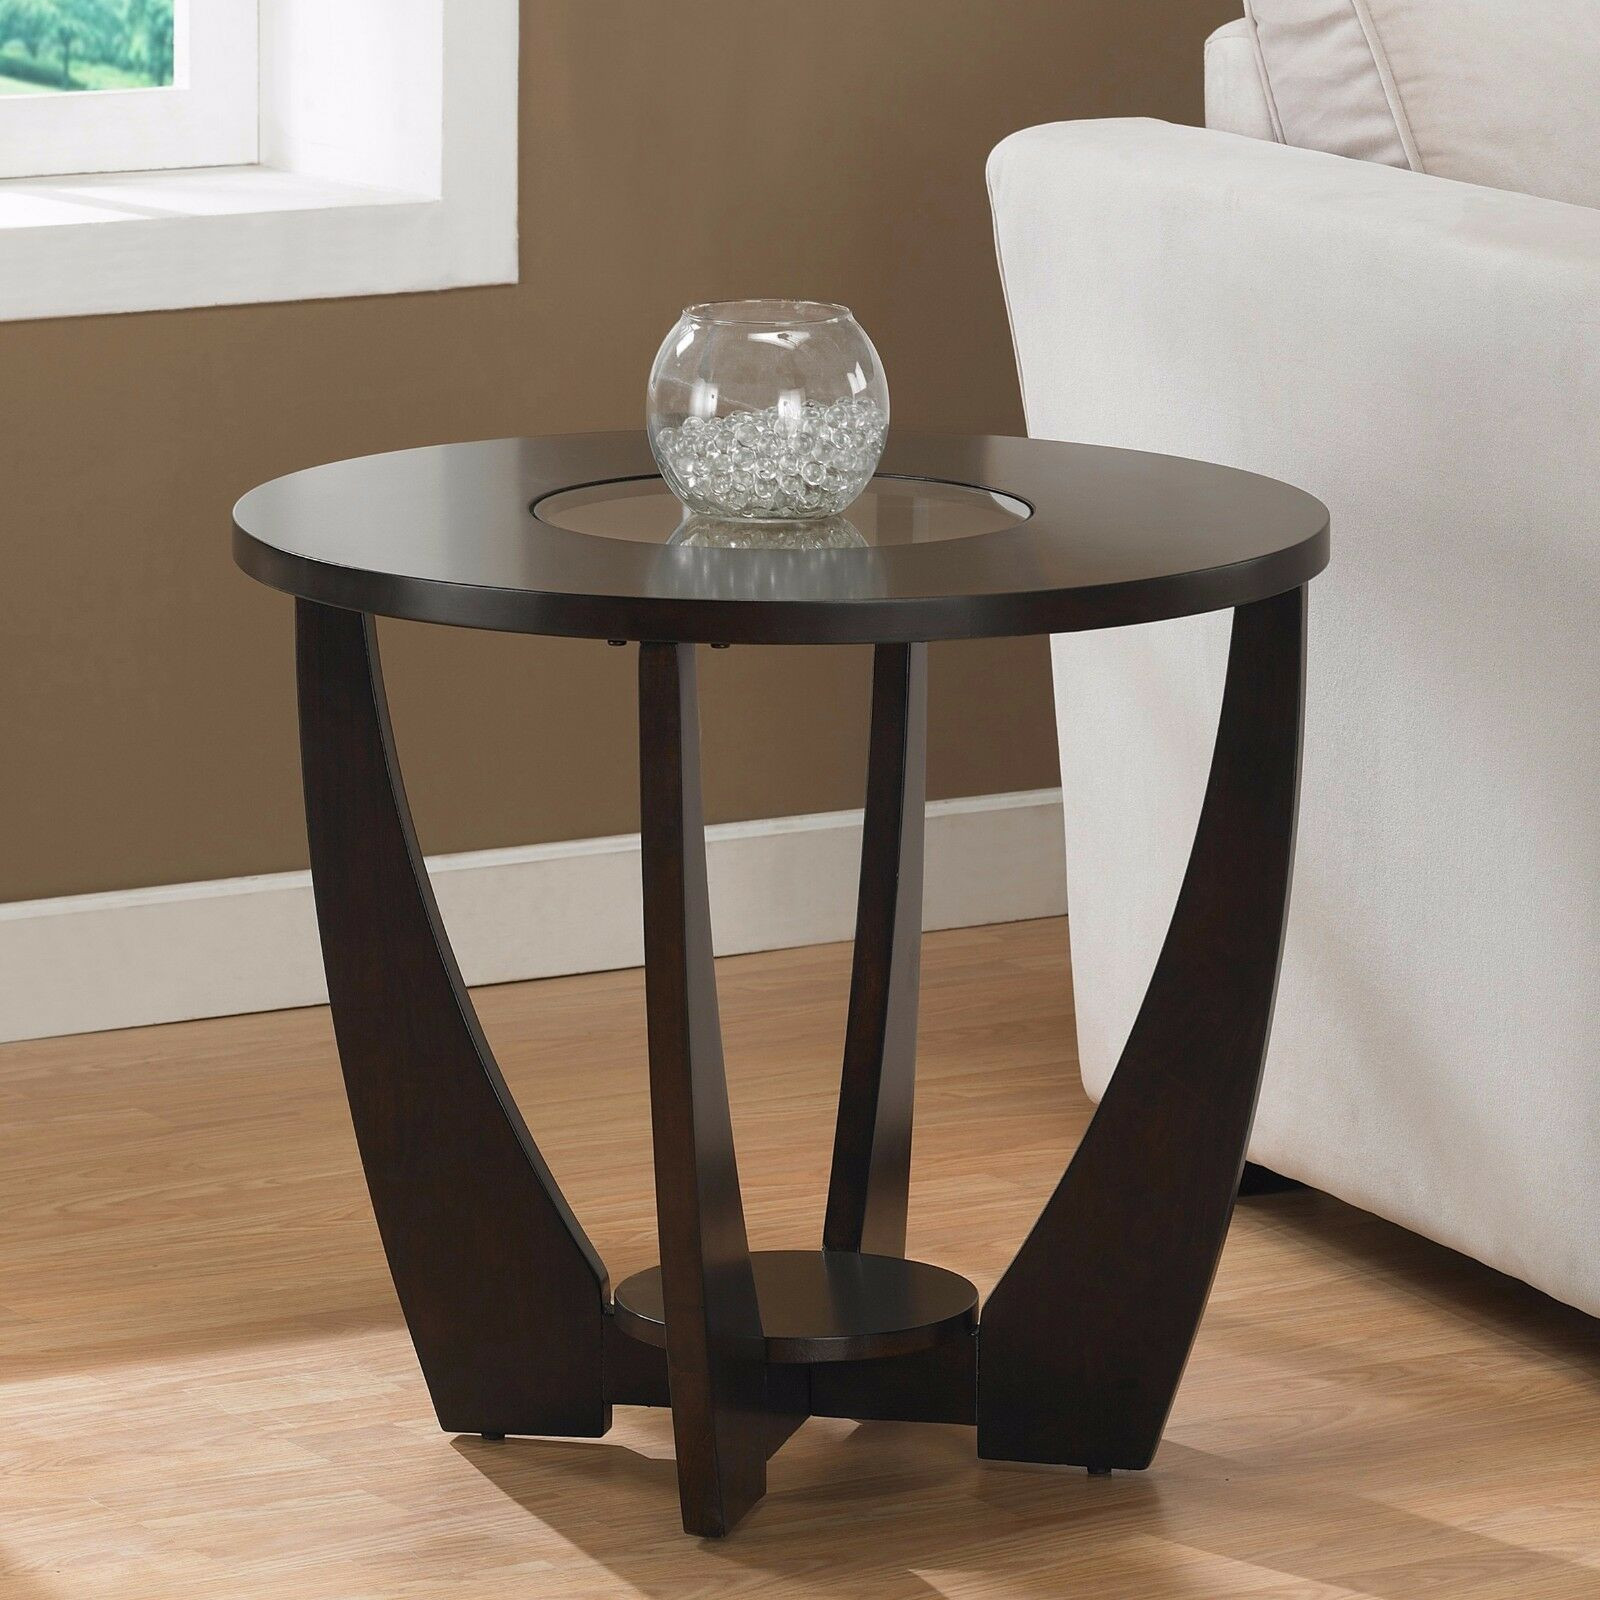 Living Room Side Tables
 Dark Brown Round End Table with Glass Top Living Room